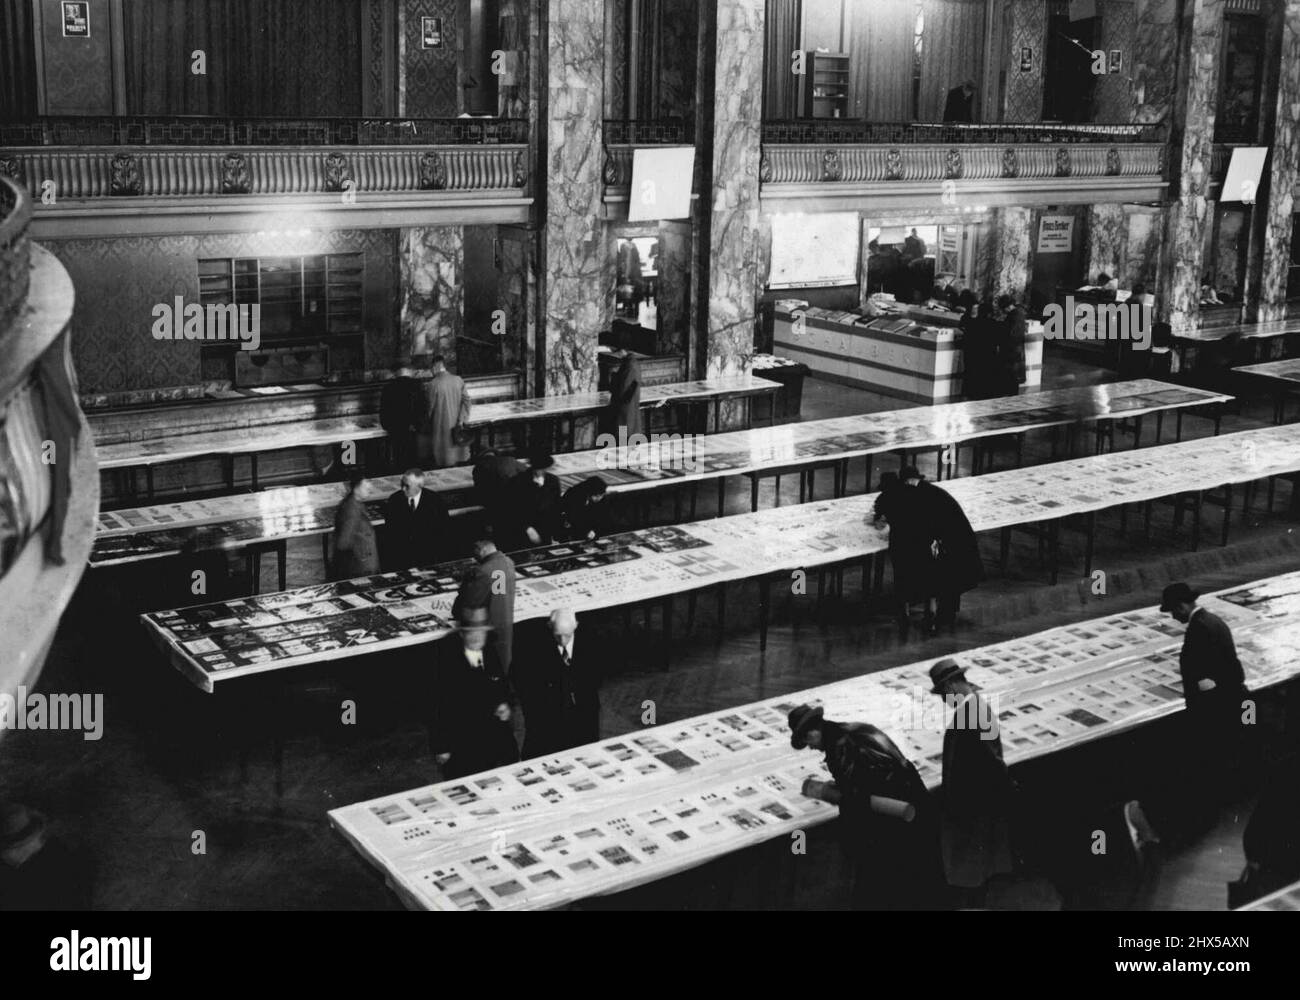 Stamp-exhibition in Berlin -- On 16th April the exhibition 'The German stamps' was opened in Berlin. T.P.S. a view of the exhibition rooms. May 31, 1937. Stock Photo